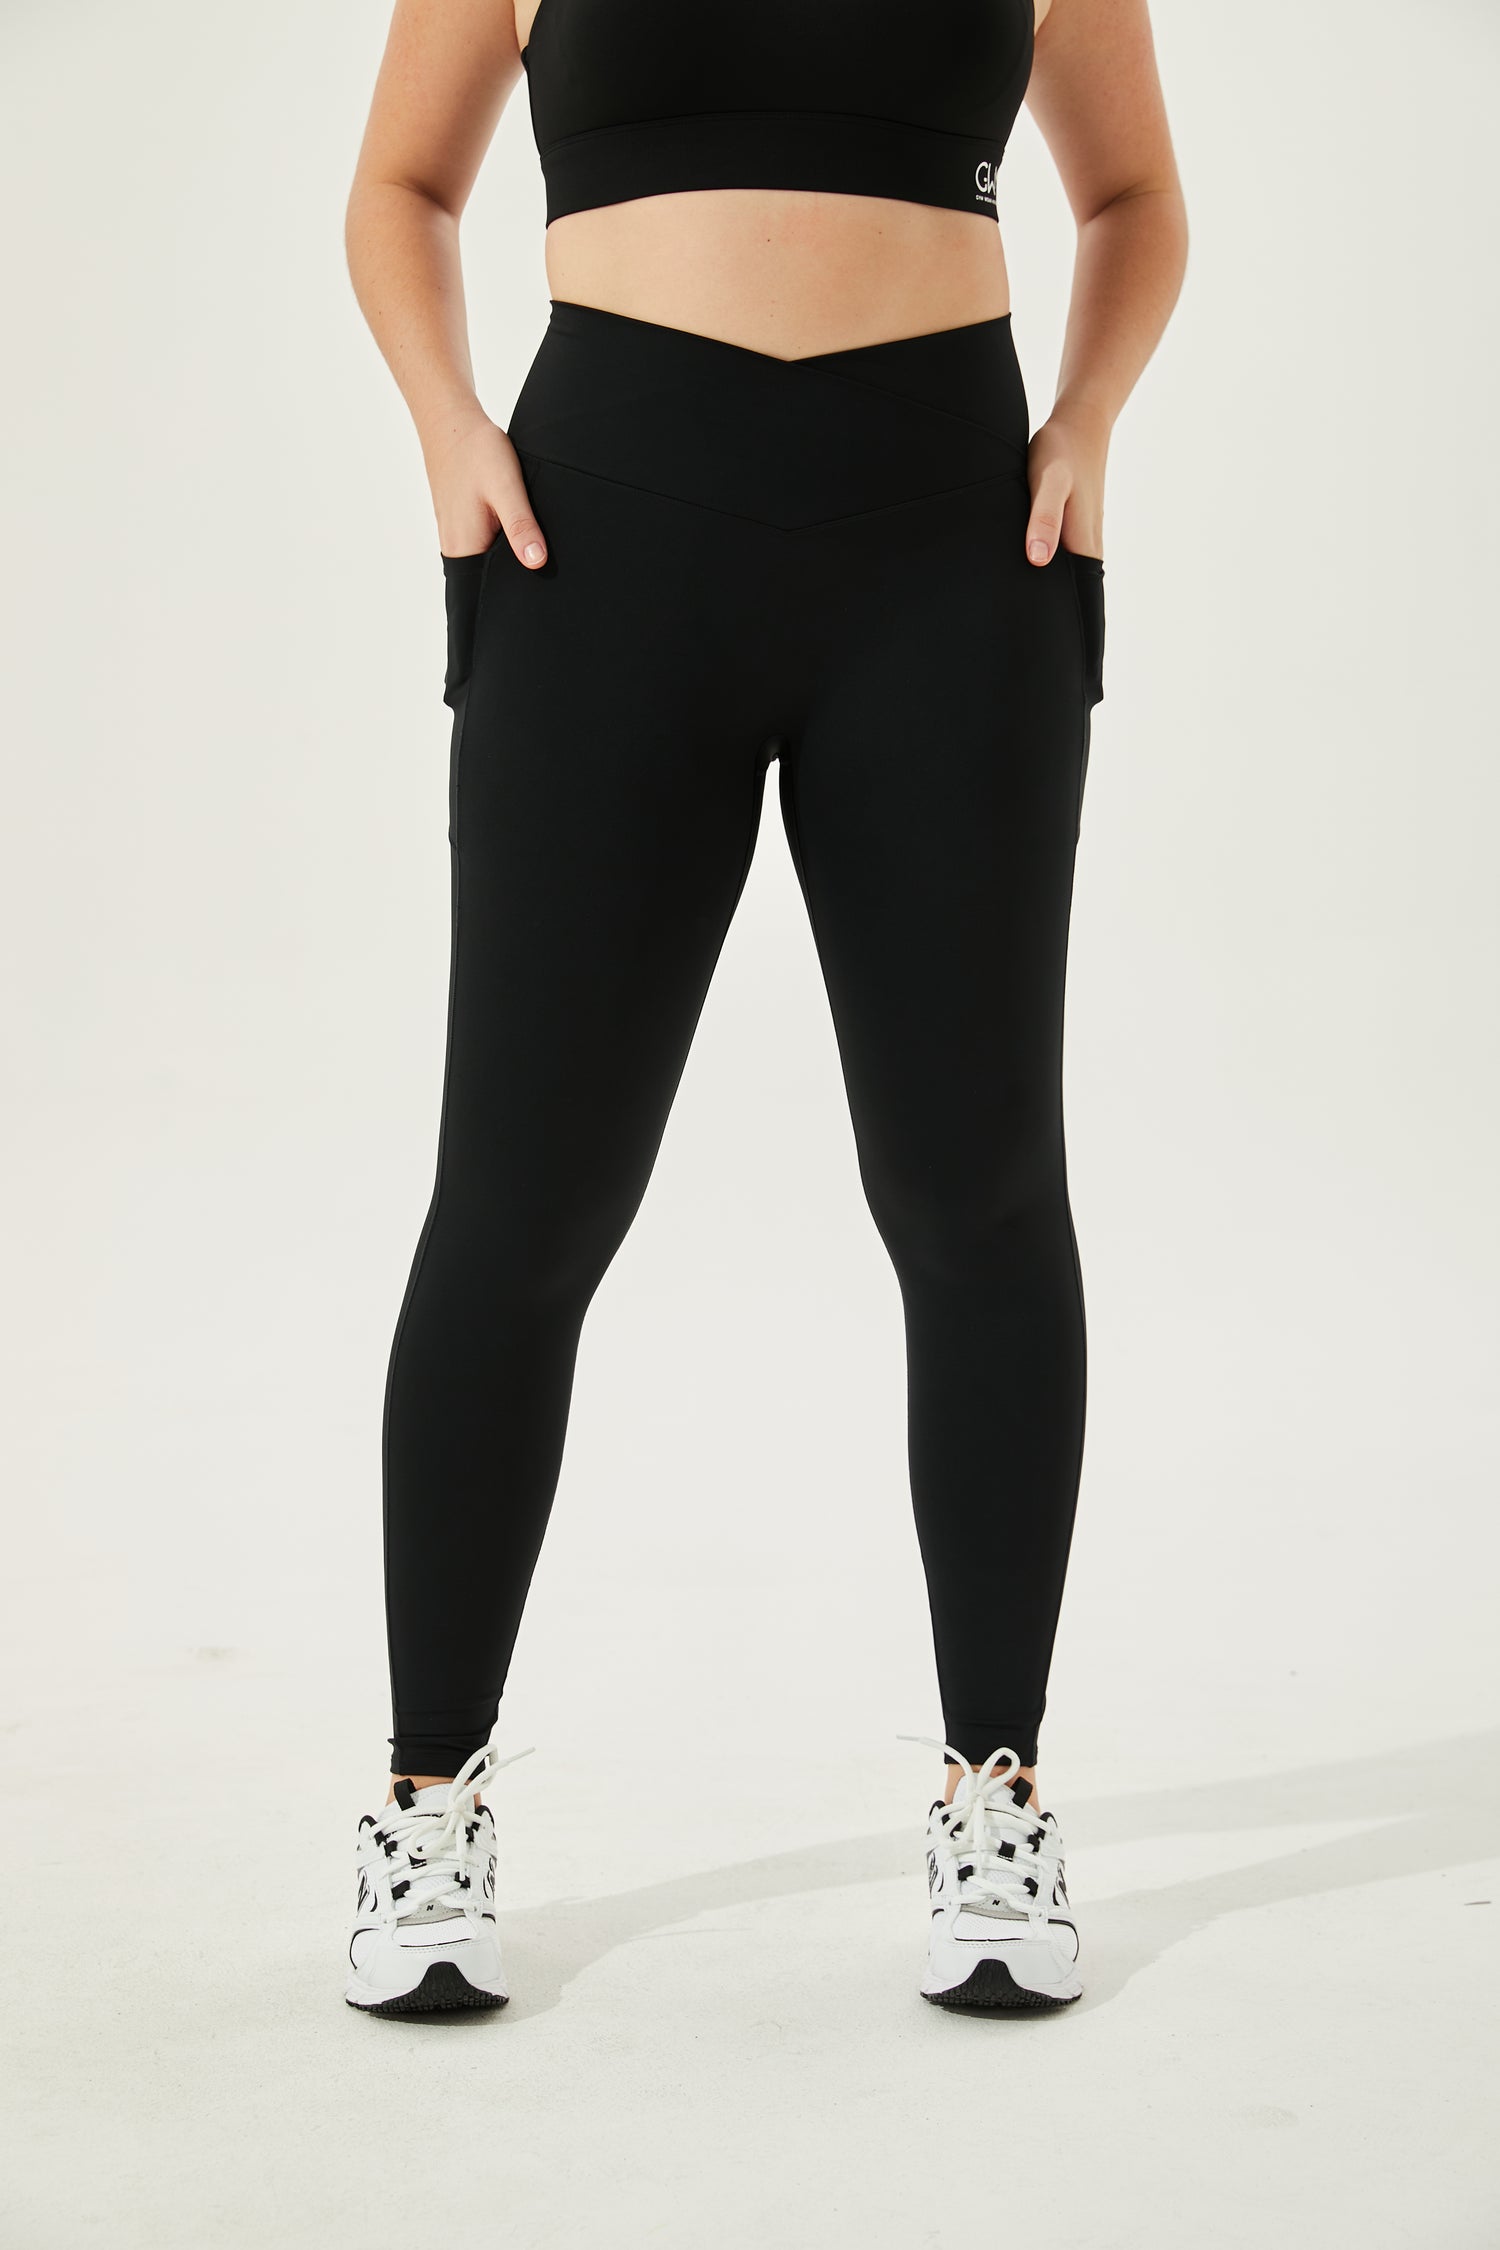 High-Waist Buttery Soft Camel-Toe Proof Crossover Leggings With 2 Pock